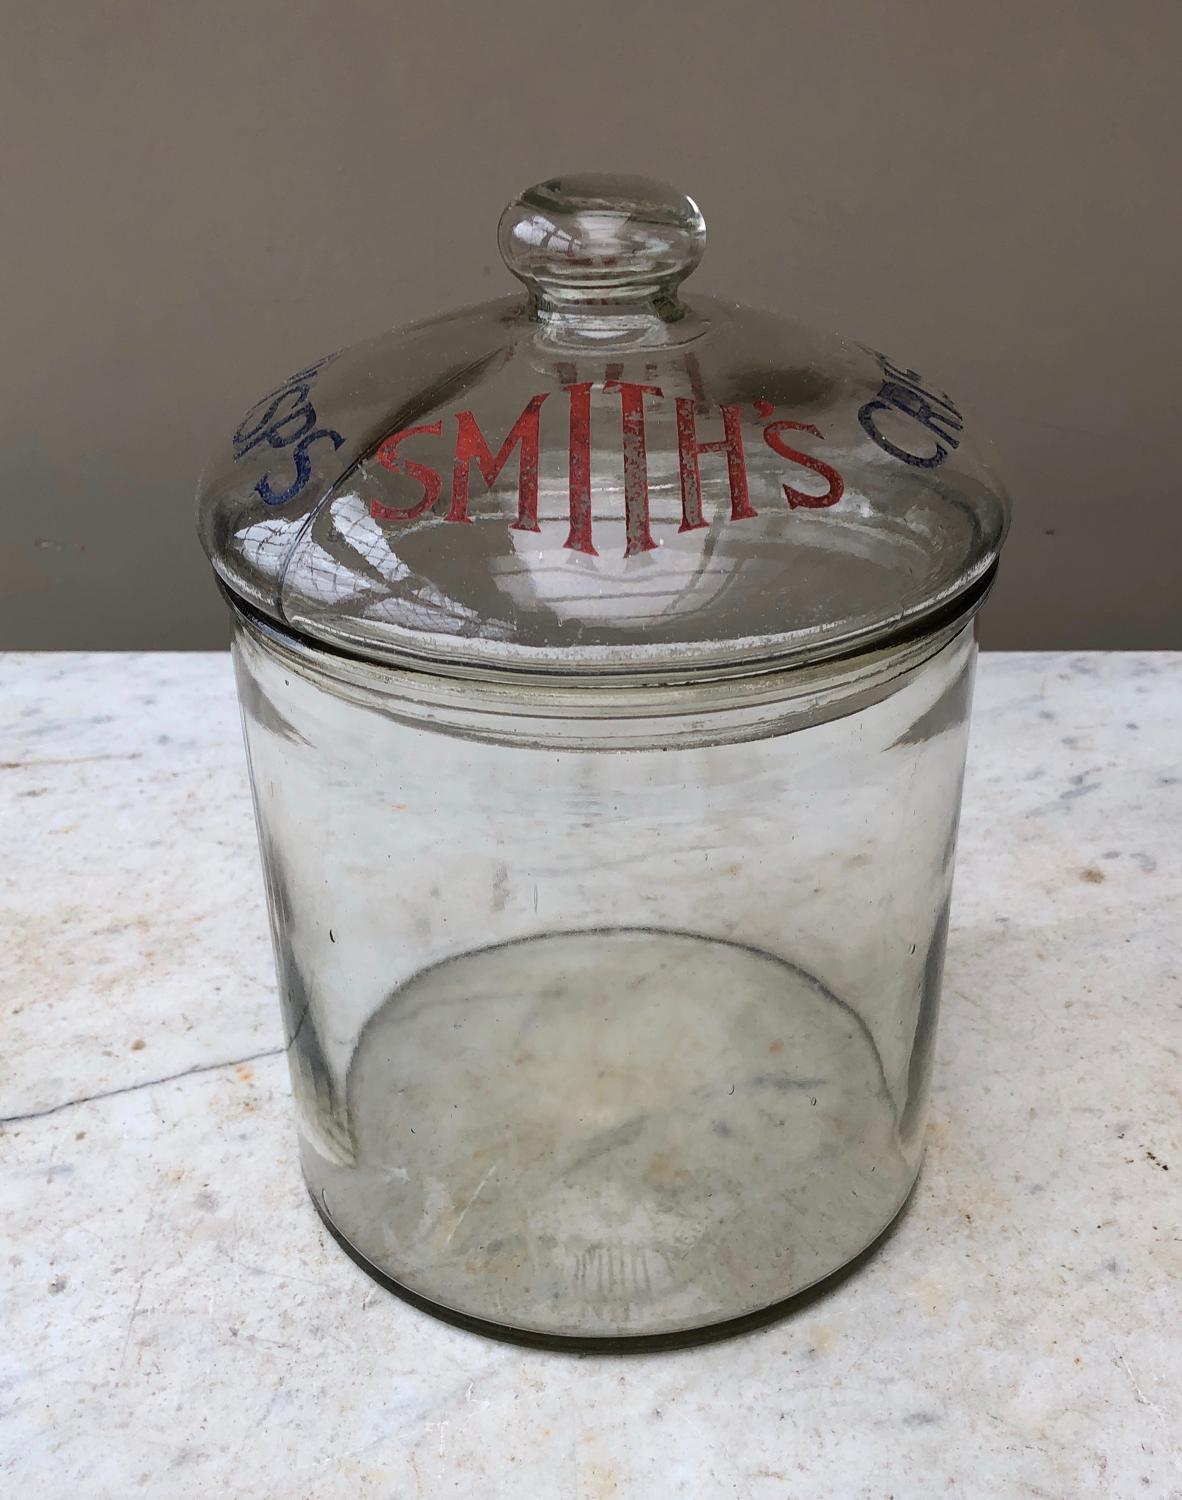 Early 20th Century Shops Advertising Jar - Smiths Crisps